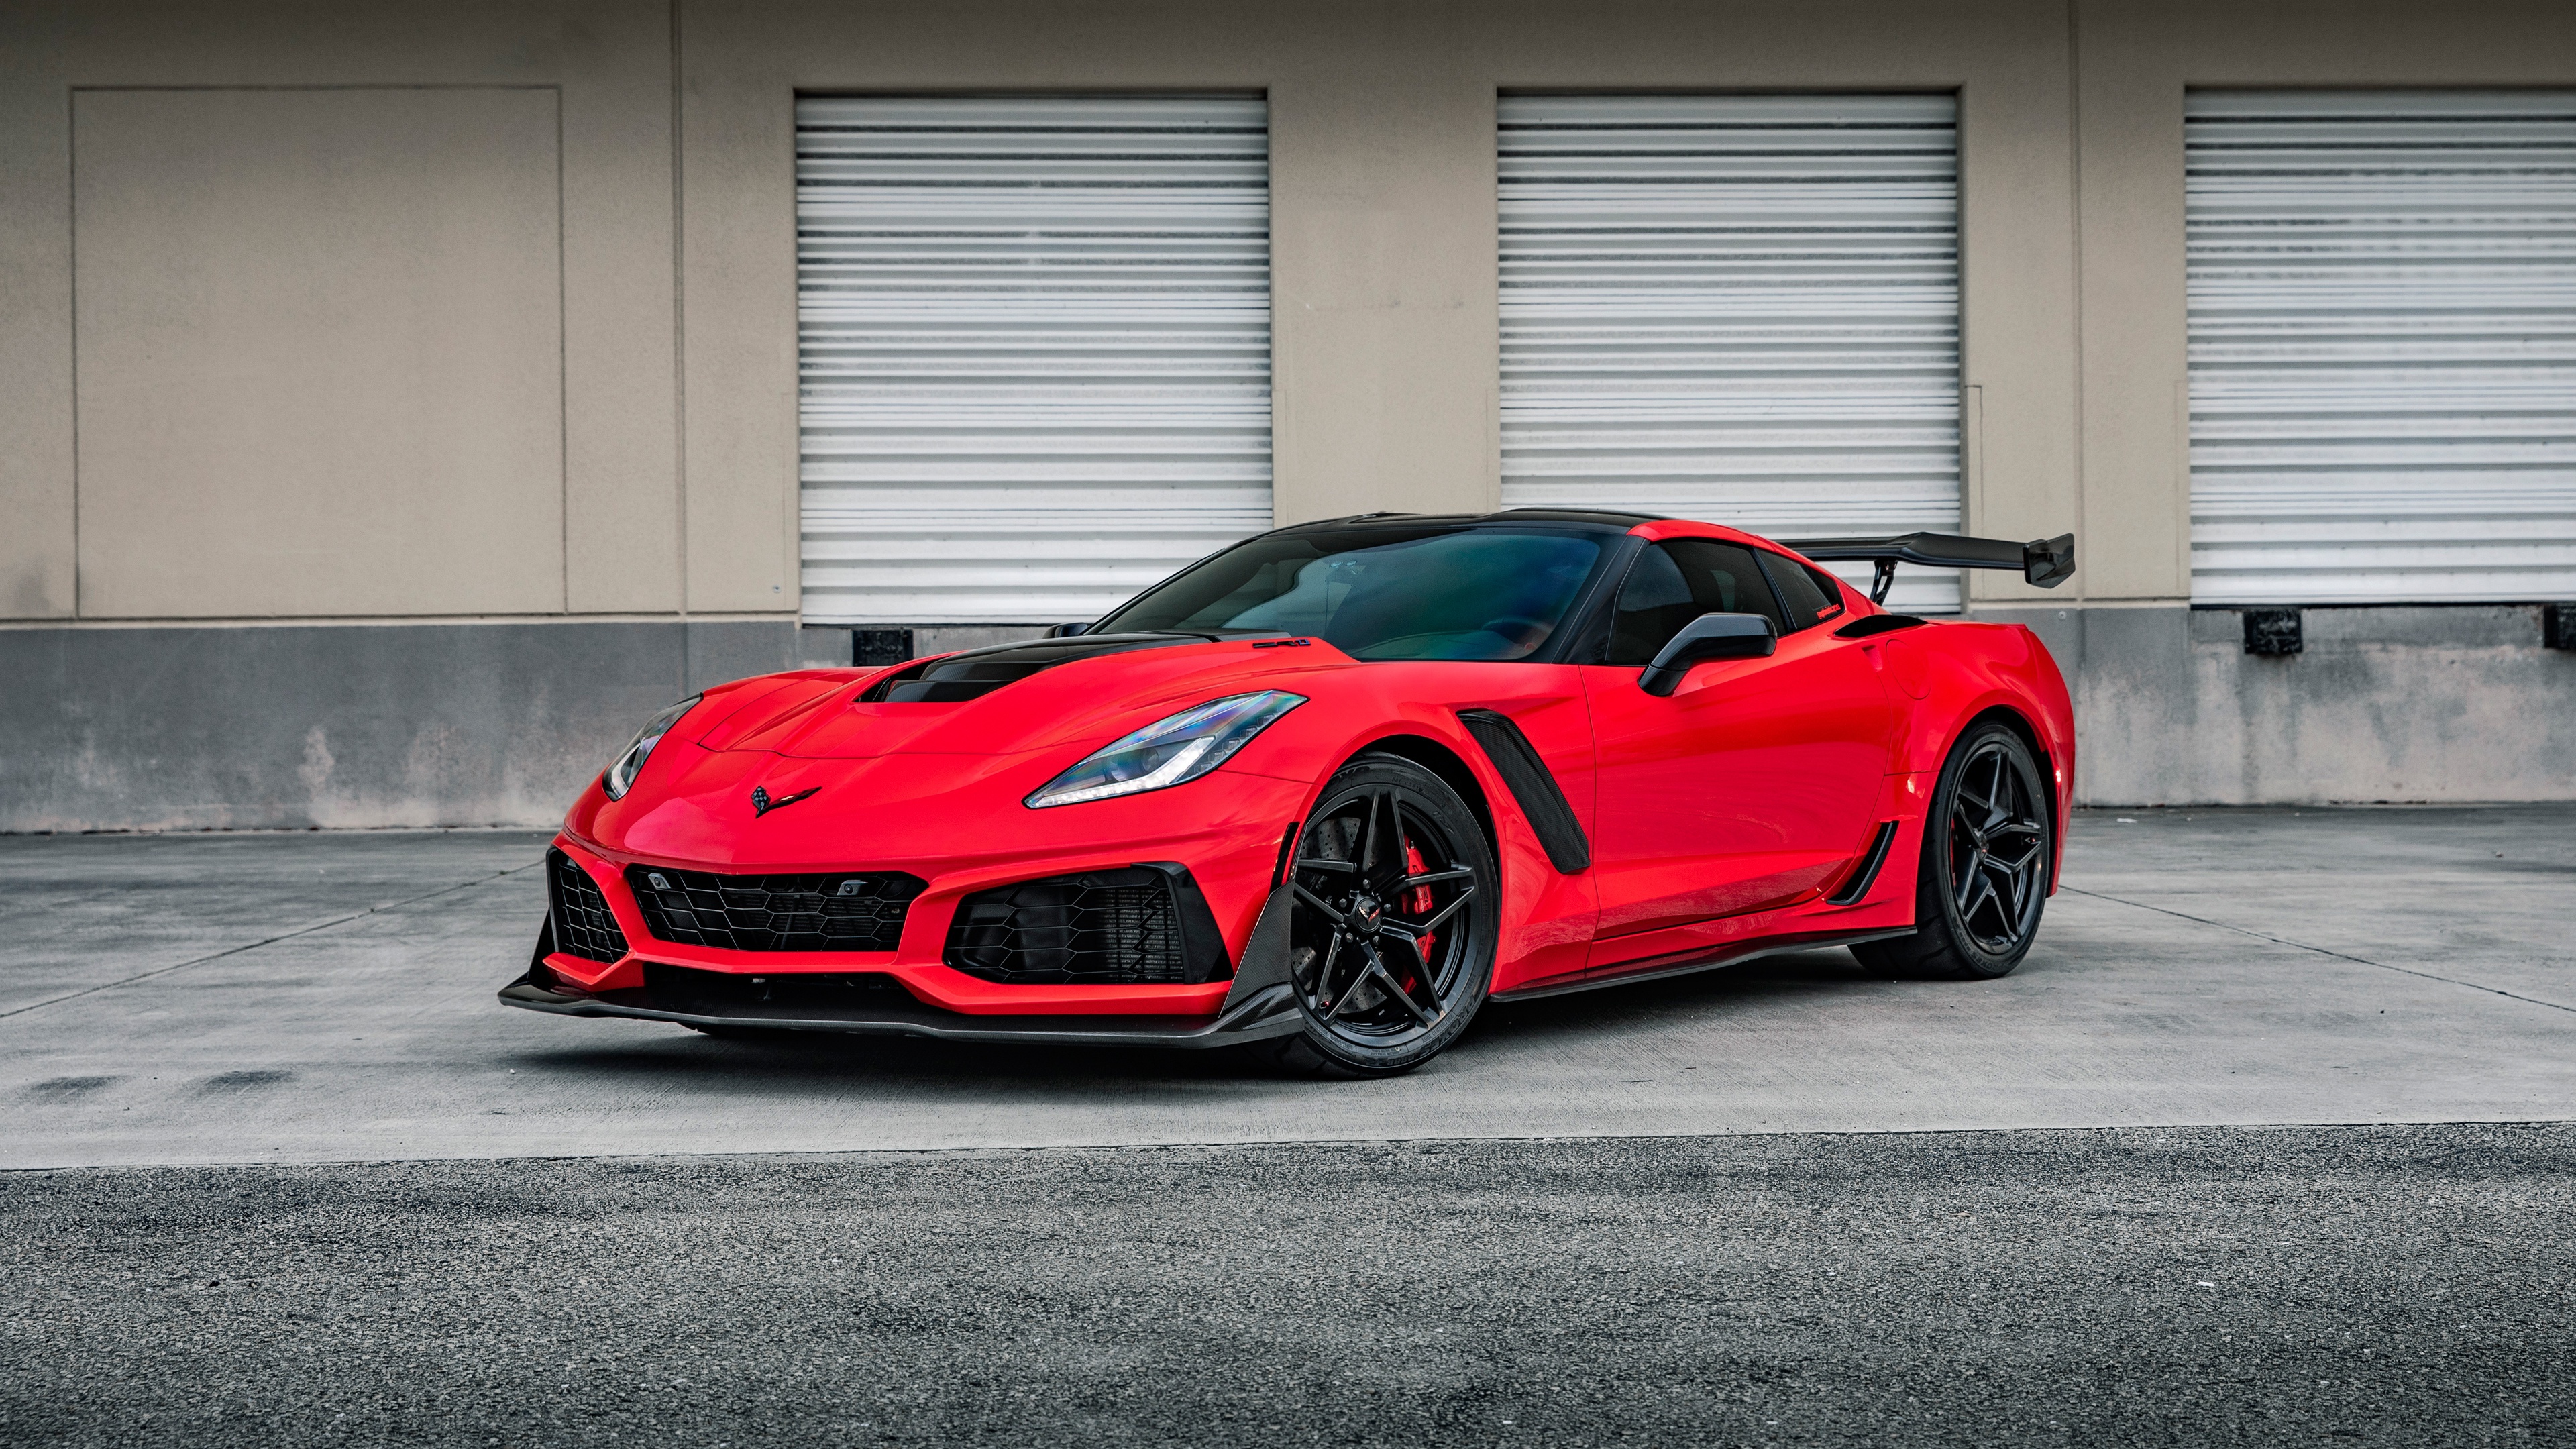 Corvette: ZR1 2019, Chevy sports car, Large rear wing, A front splitter, Racing tires and rims. 3840x2160 4K Background.